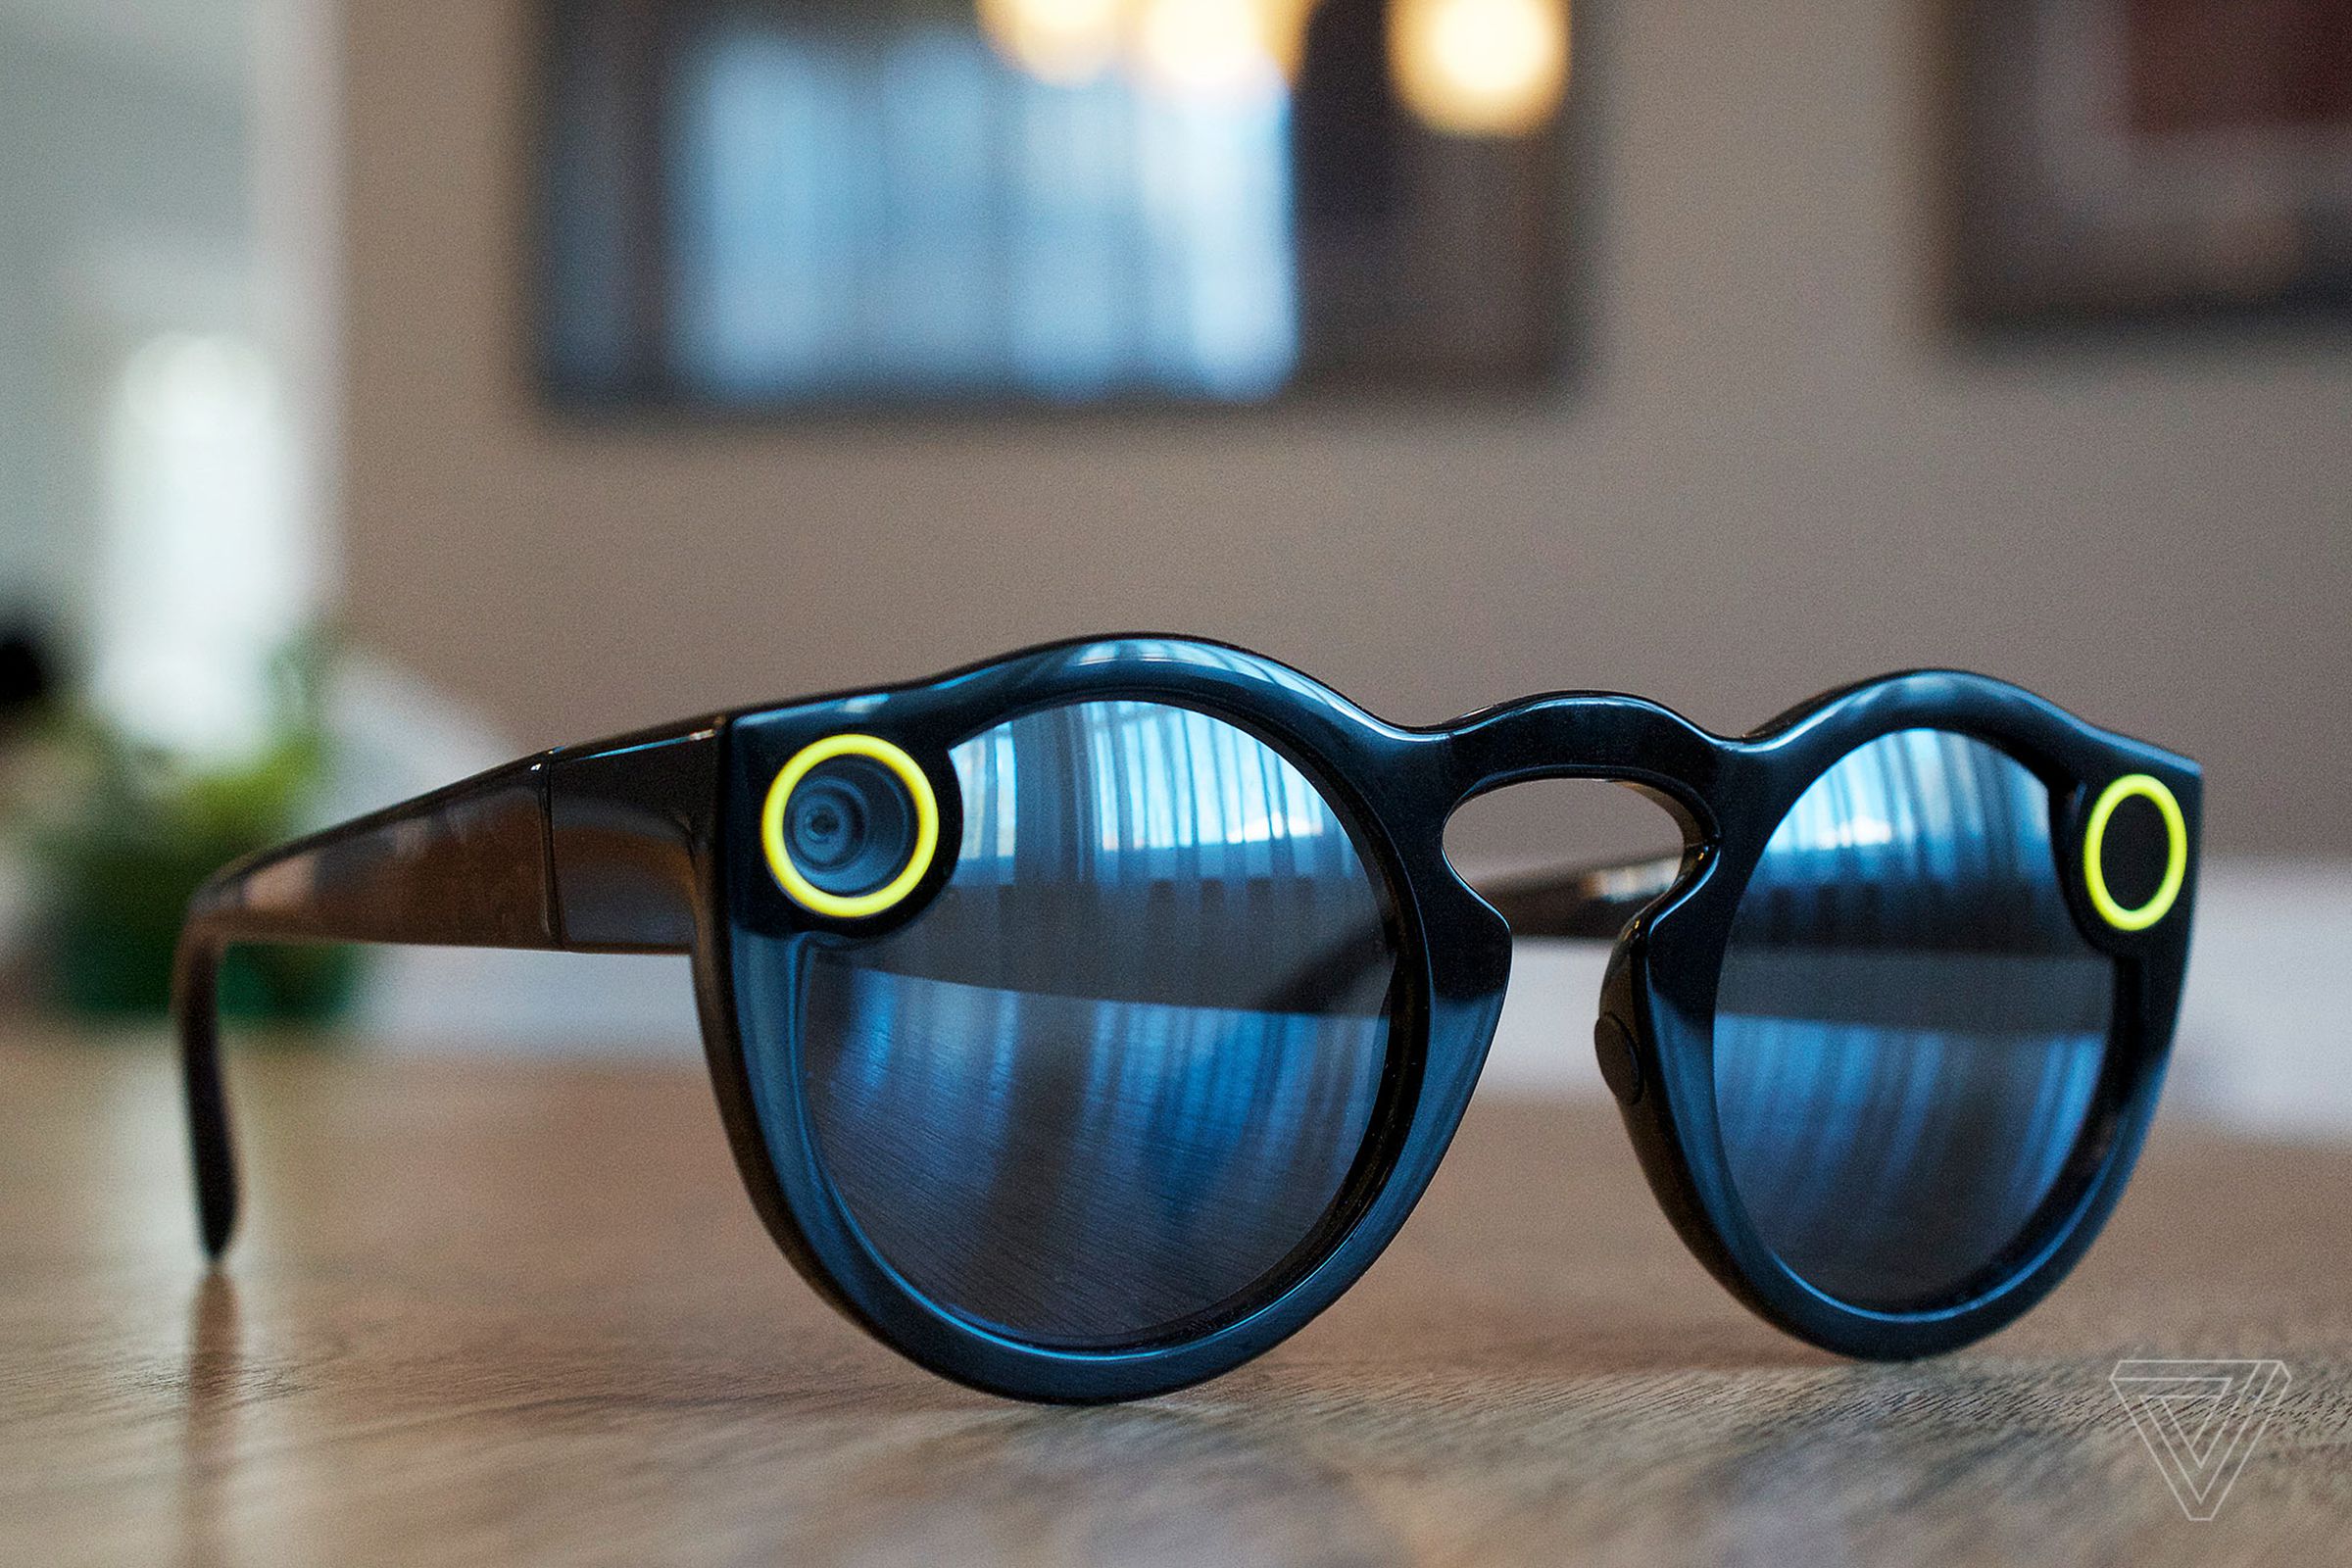 Snapchat Spectacles hands-on images